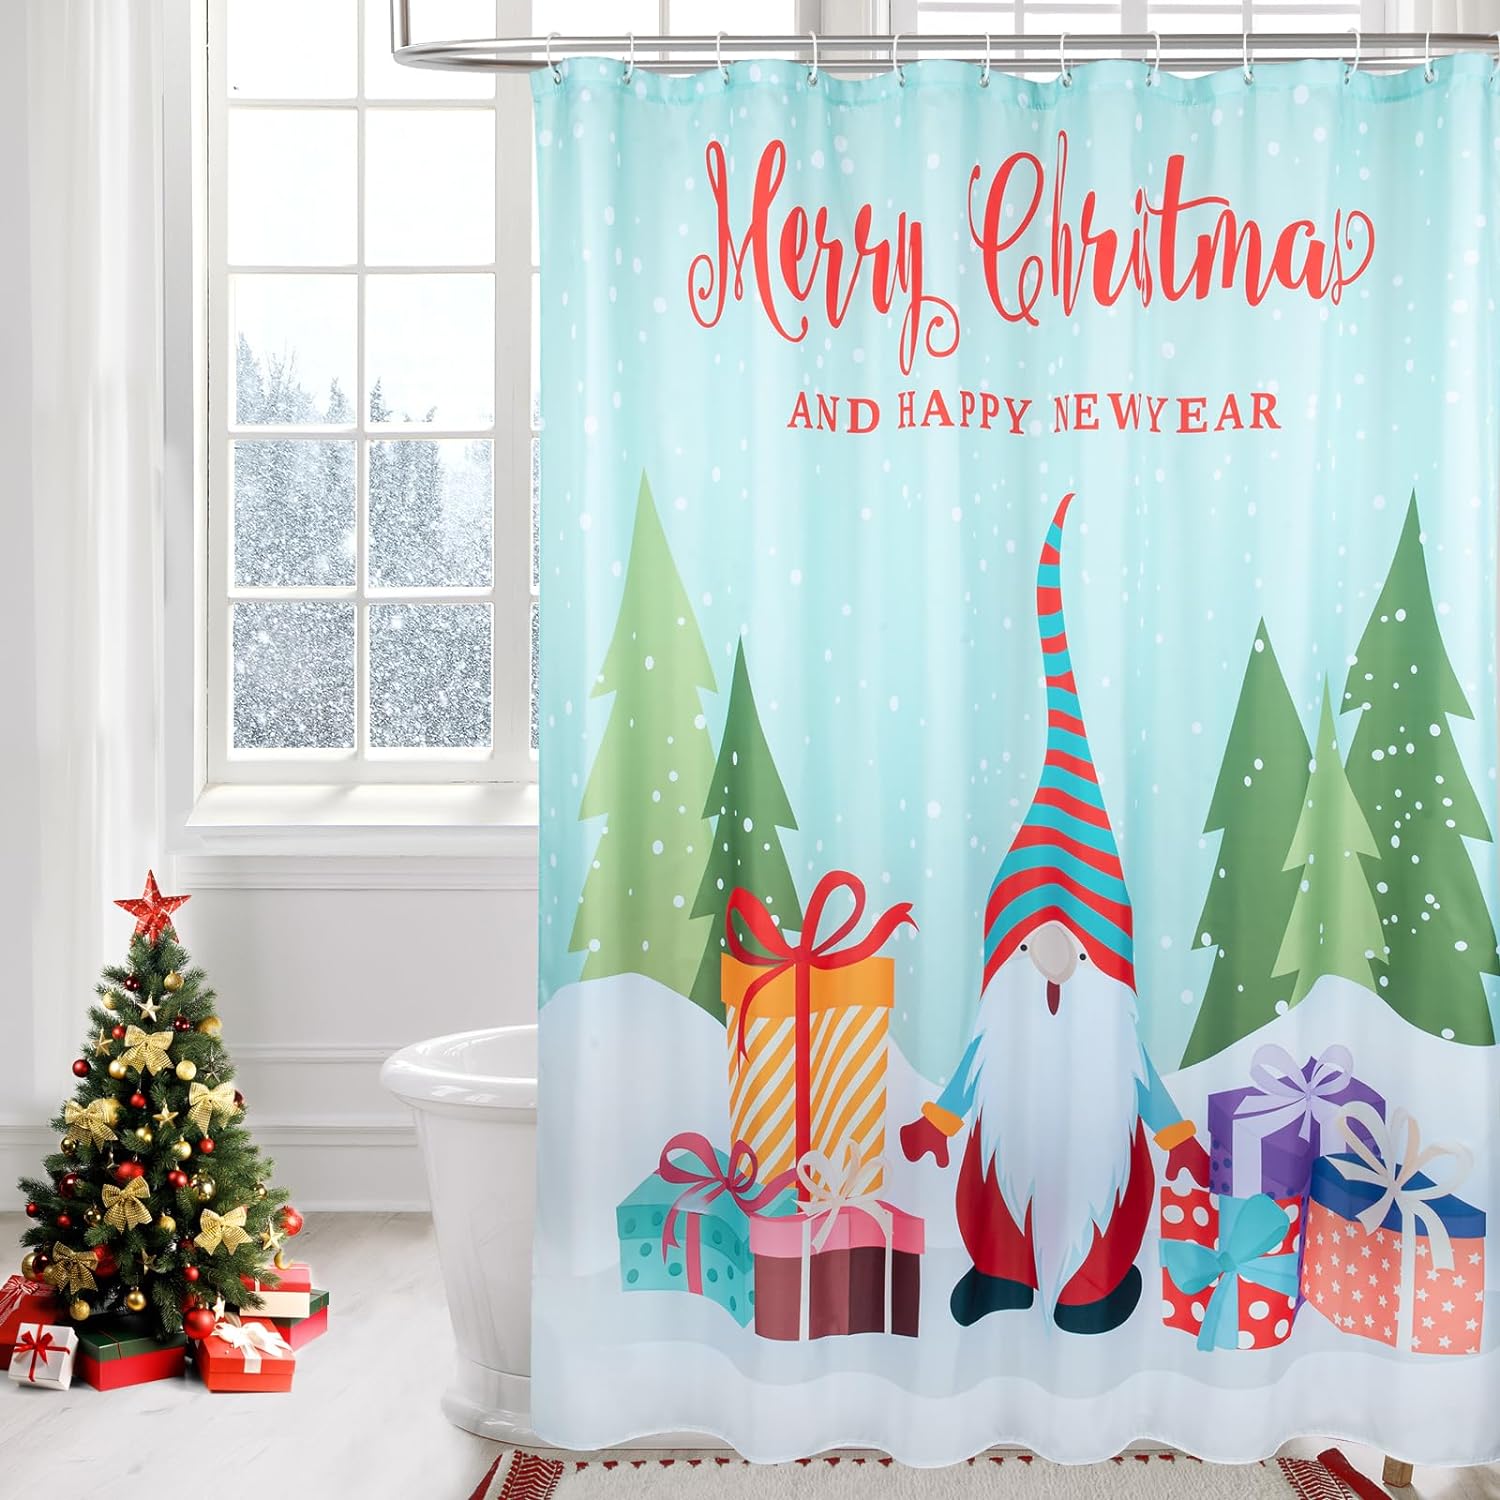 QIYI Christmas Shower Curtain Set, New Year Happy Gnome Shower Curtain Liner, Waterproof Washable Fabric Bathtub Curtain, Merry Xmas Gifts Standard Shower Curtain for Bathroom Dcor, 72 W x 72 L